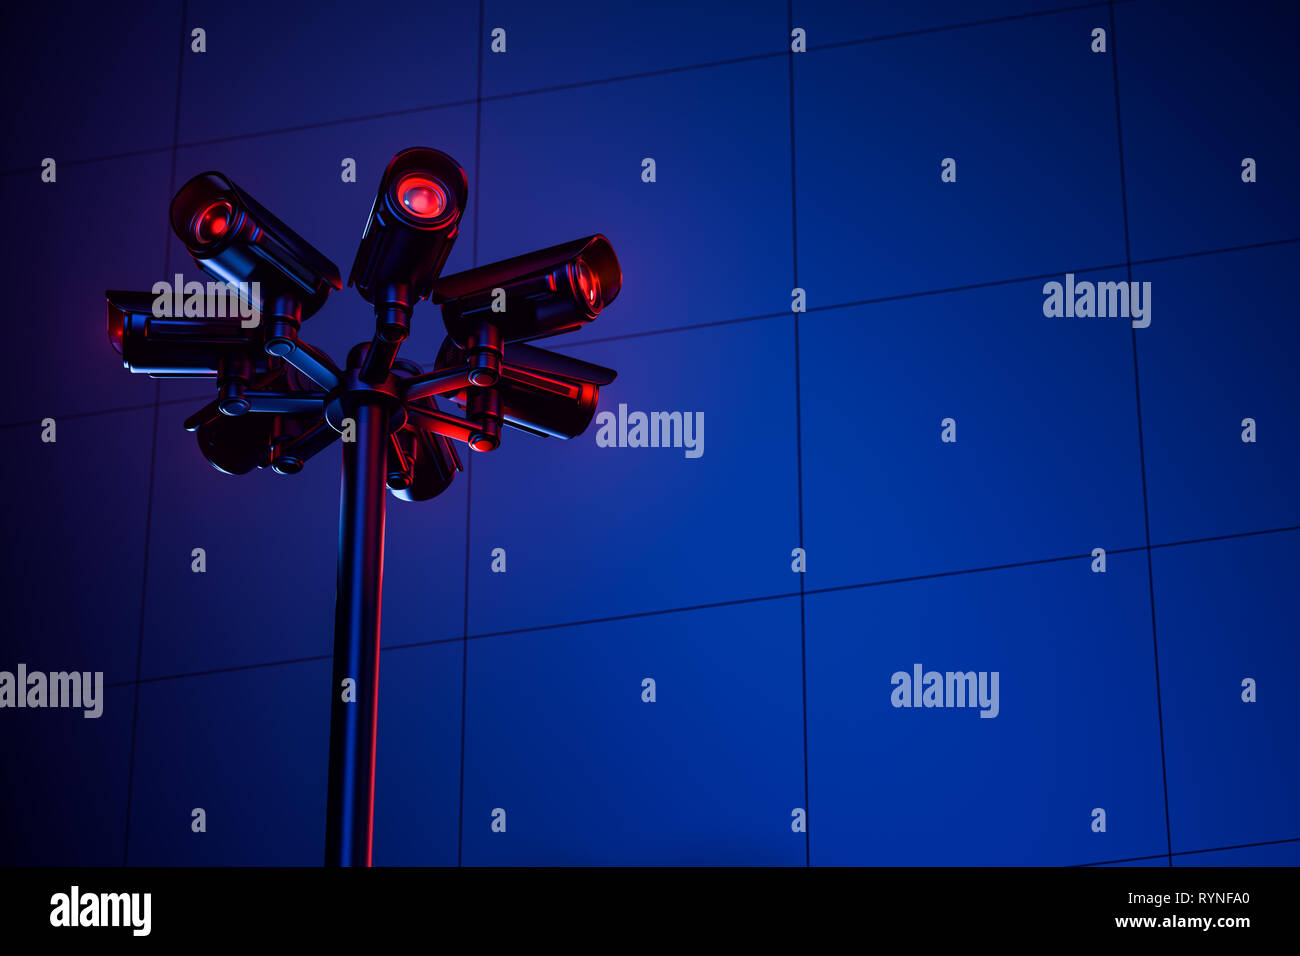 Cctv pylon with several cameras on a blue wall during night. Copy space included. Safety and monitoring concept. 3D rendering Stock Photo